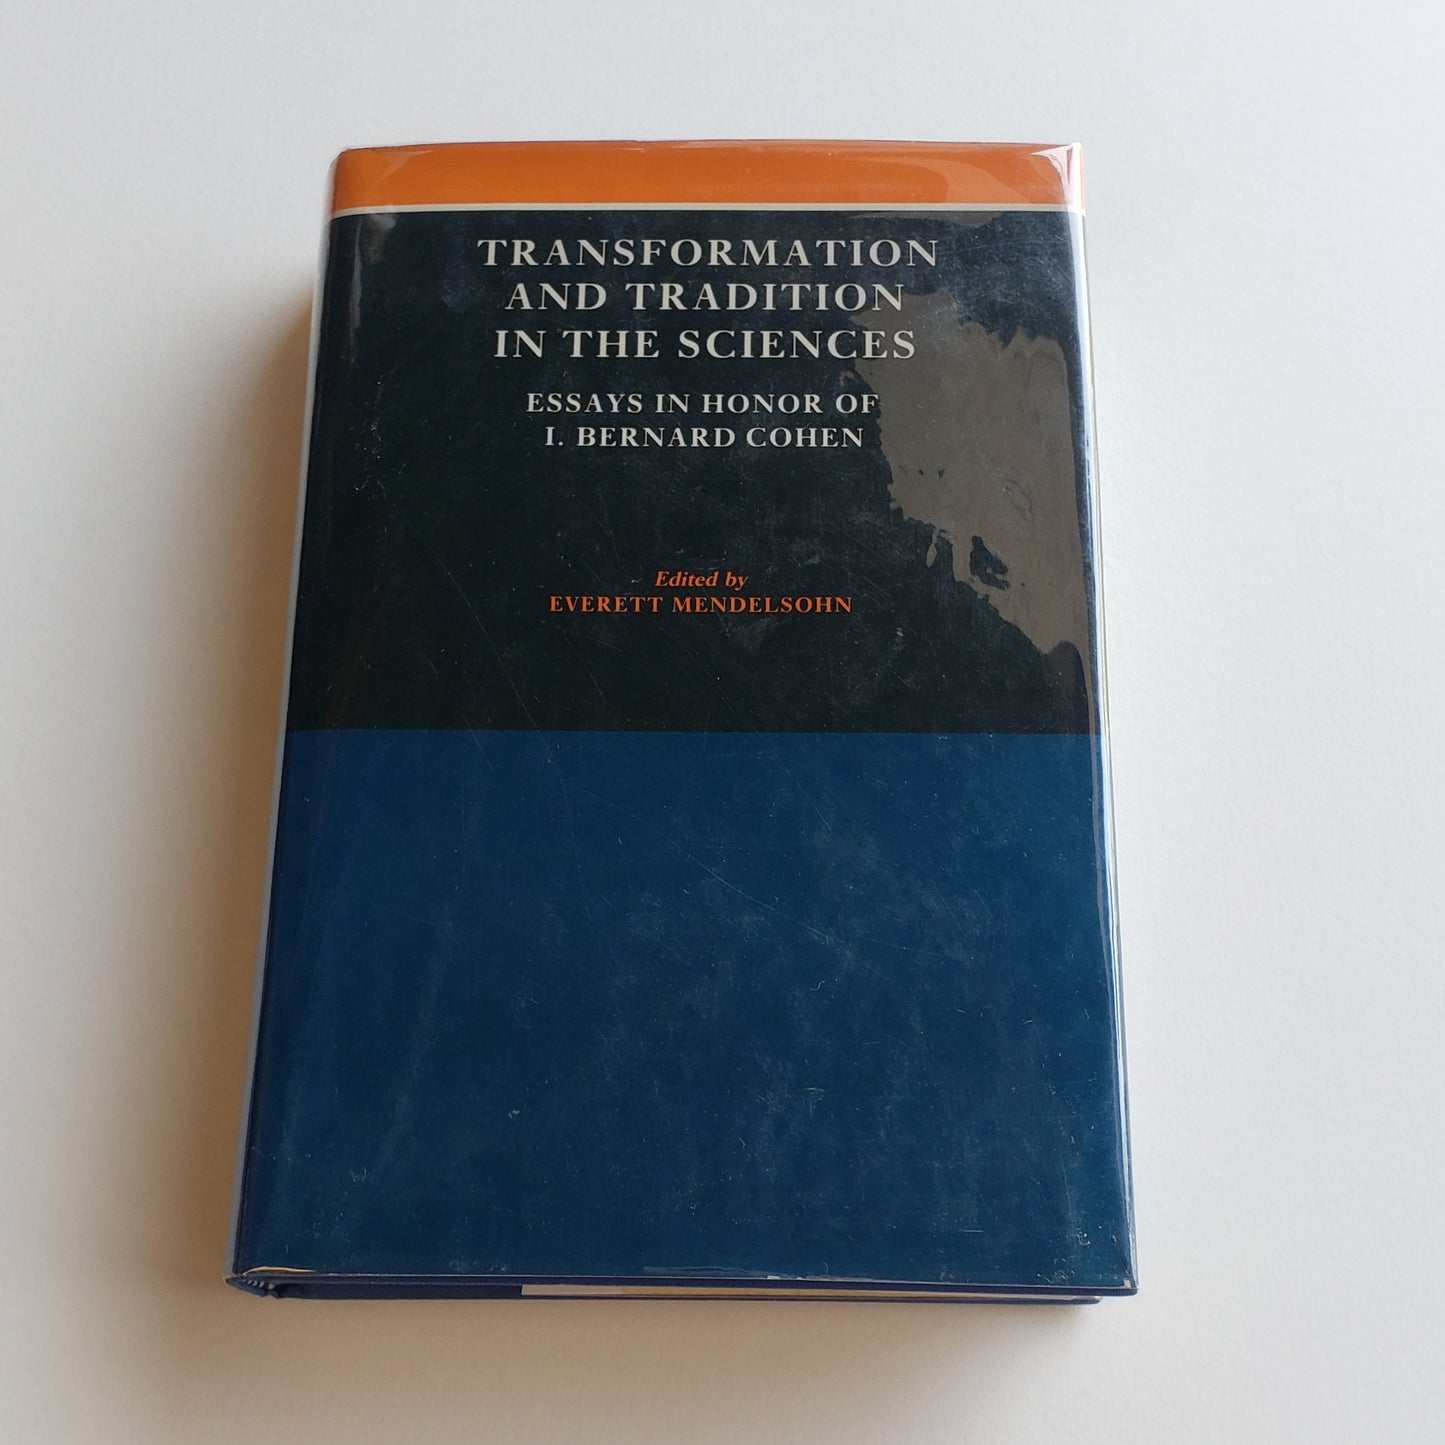 Vintage Book- Transformation and Tradition in the Sciences: Essays in Honor of I. Bernard Cohen (Science)